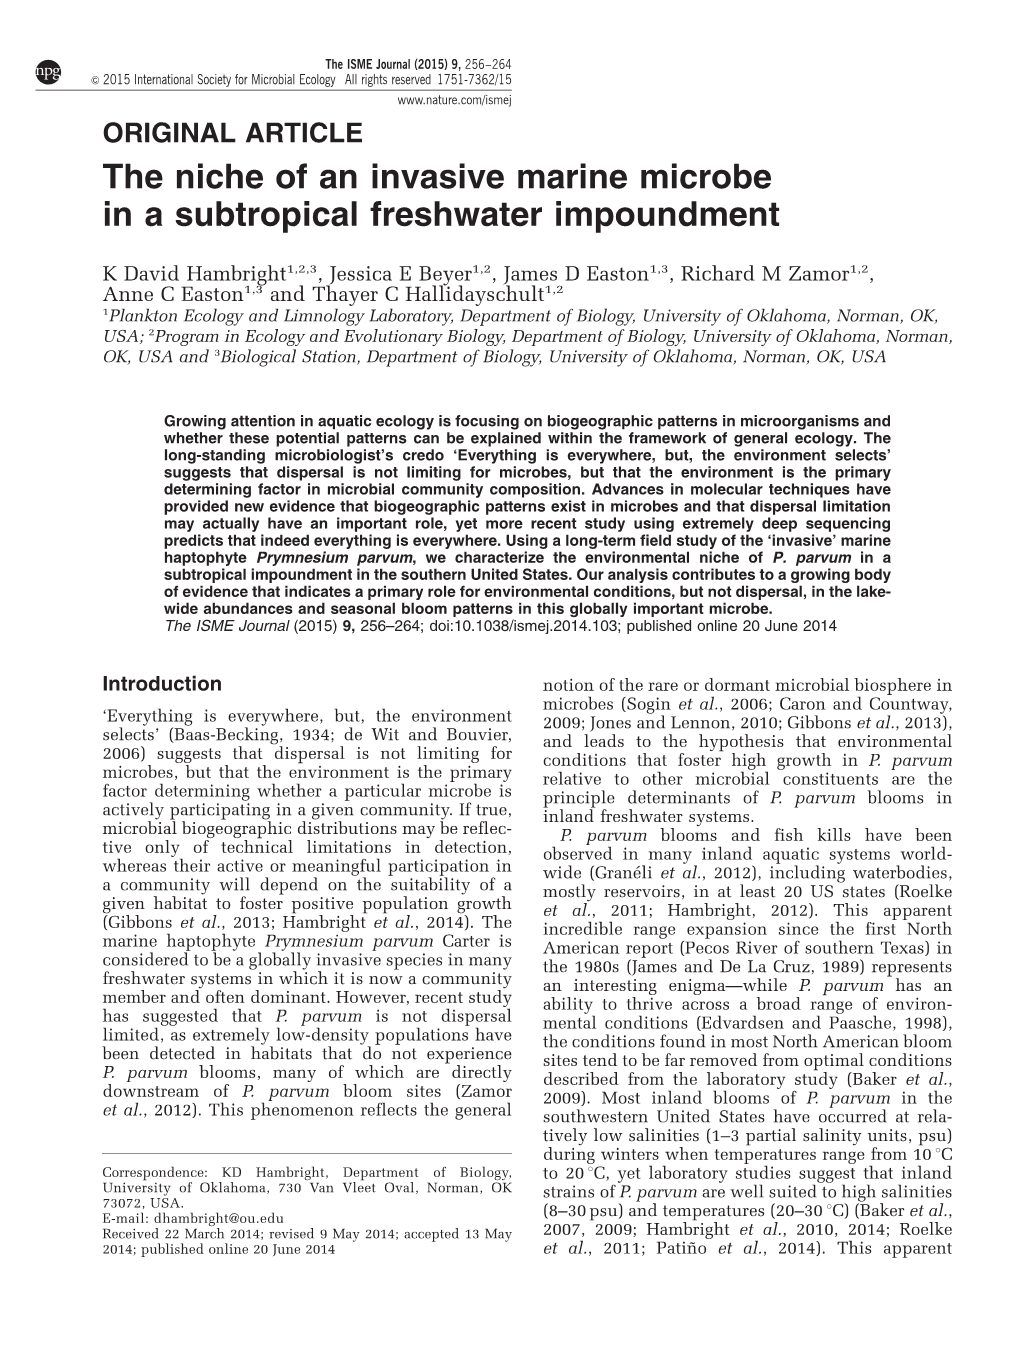 The Niche of an Invasive Marine Microbe in a Subtropical Freshwater Impoundment